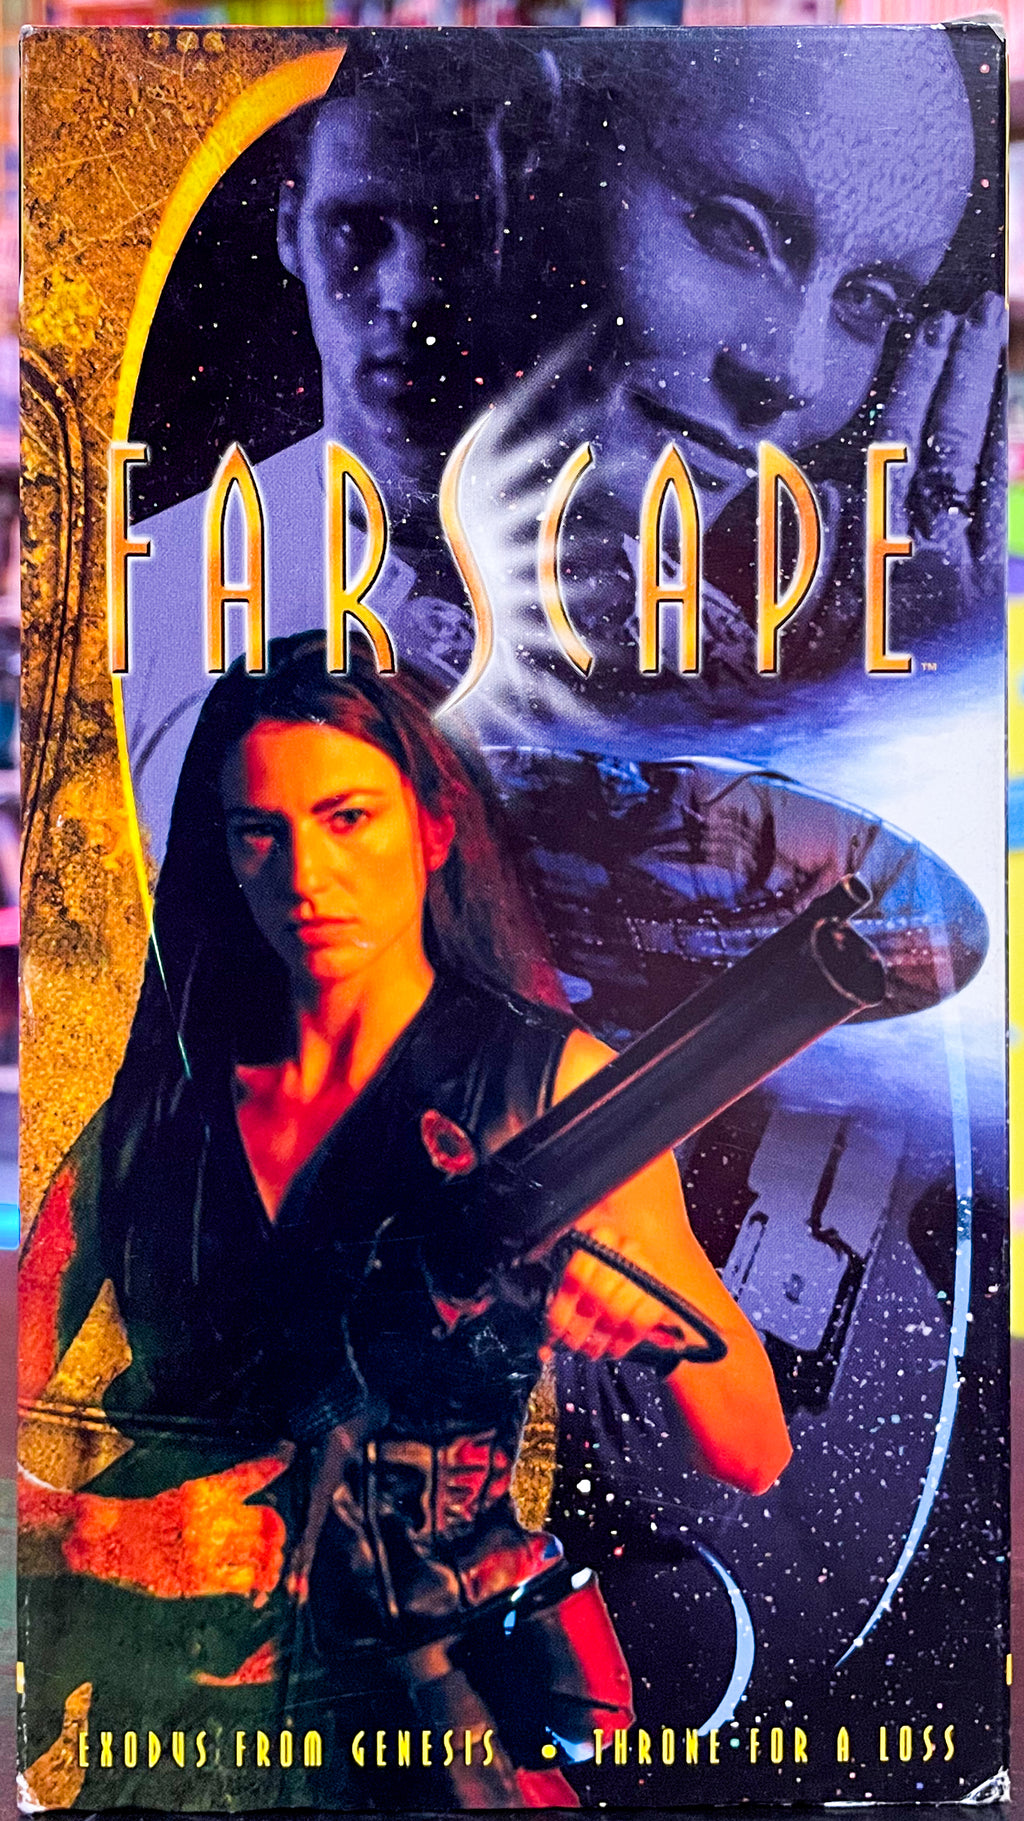 Farscape: Exodus from Genesis/Throne for a Loss